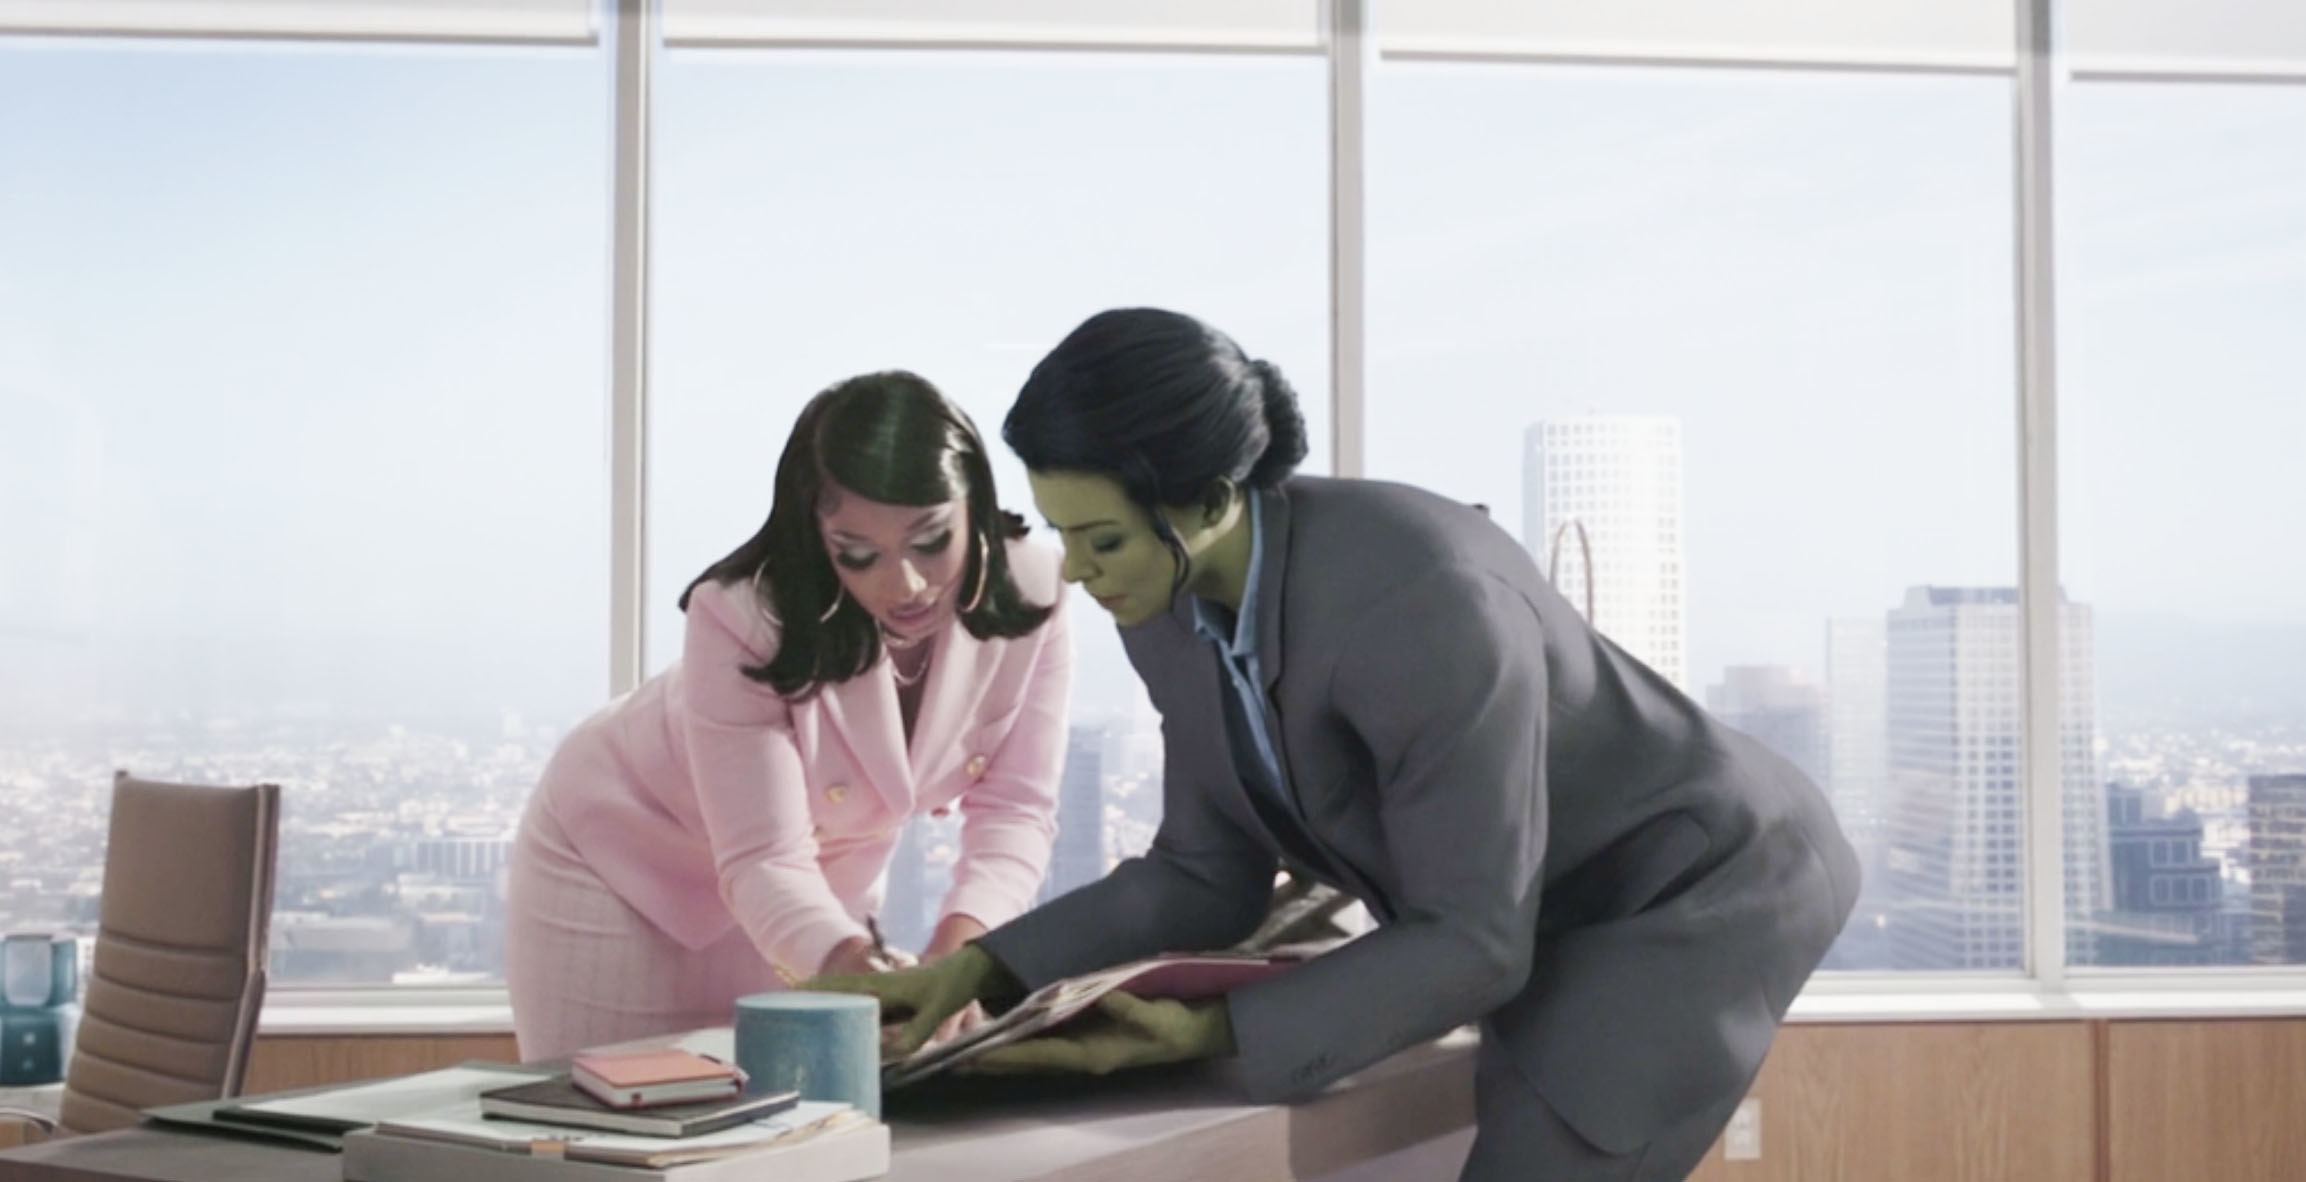 Megan and She-Hulk looking at something on a desk